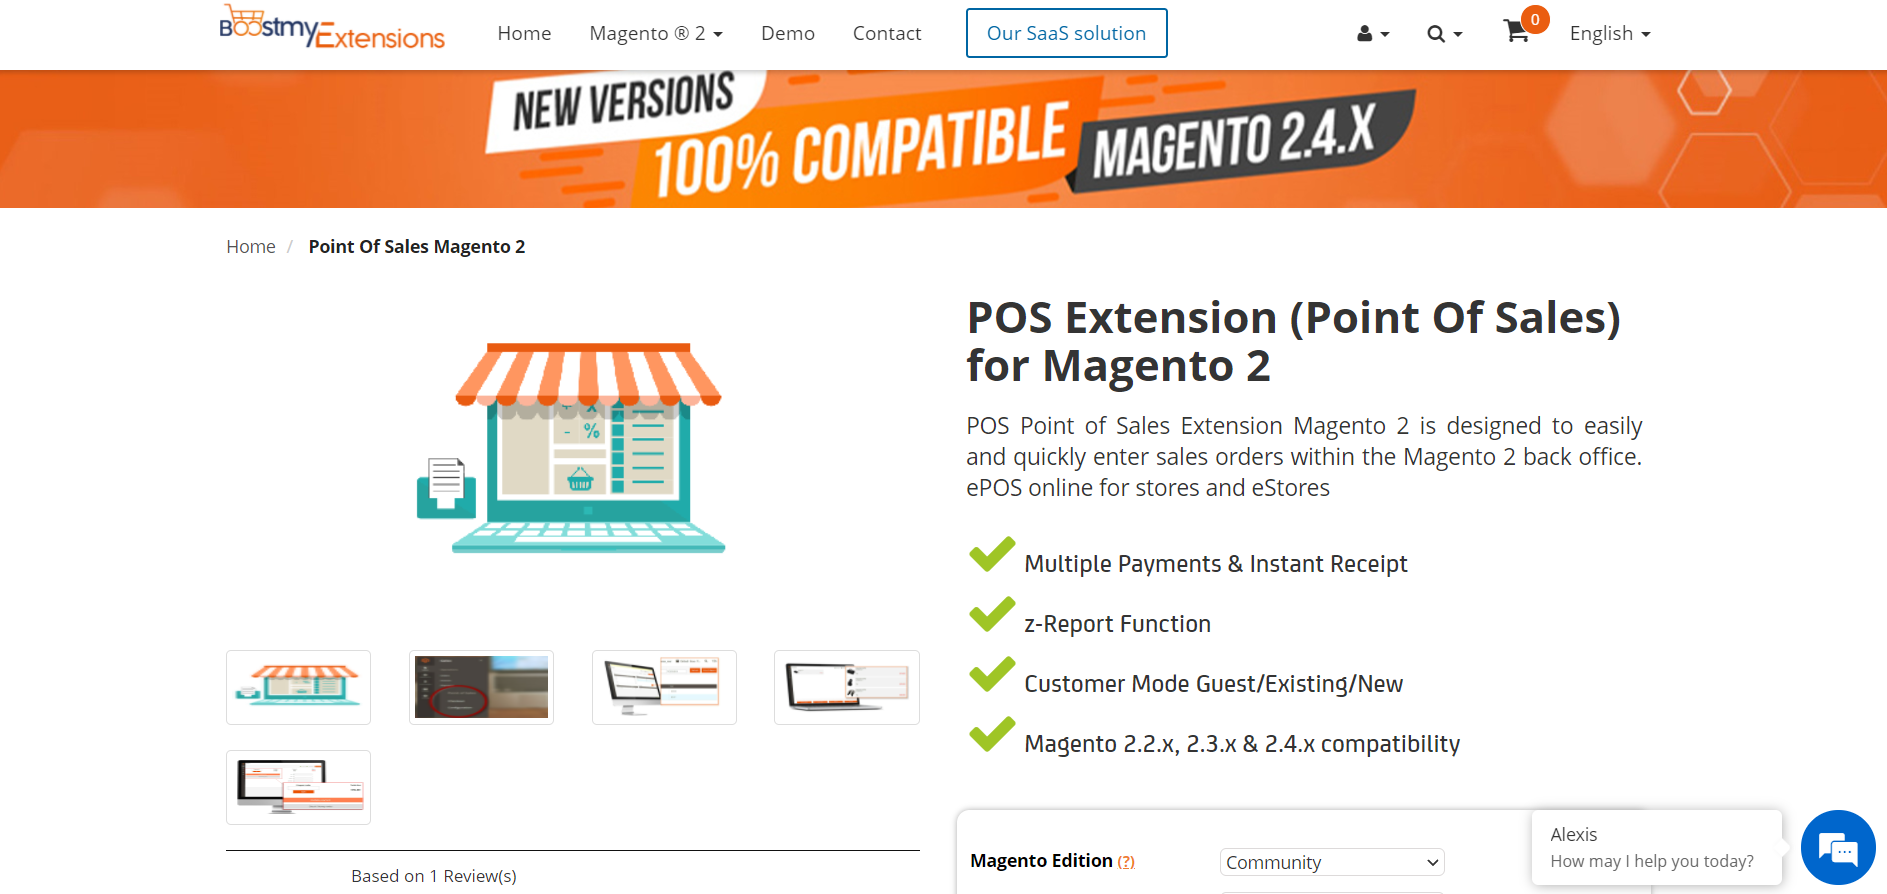 POS Magento Extension by Boost my Shop